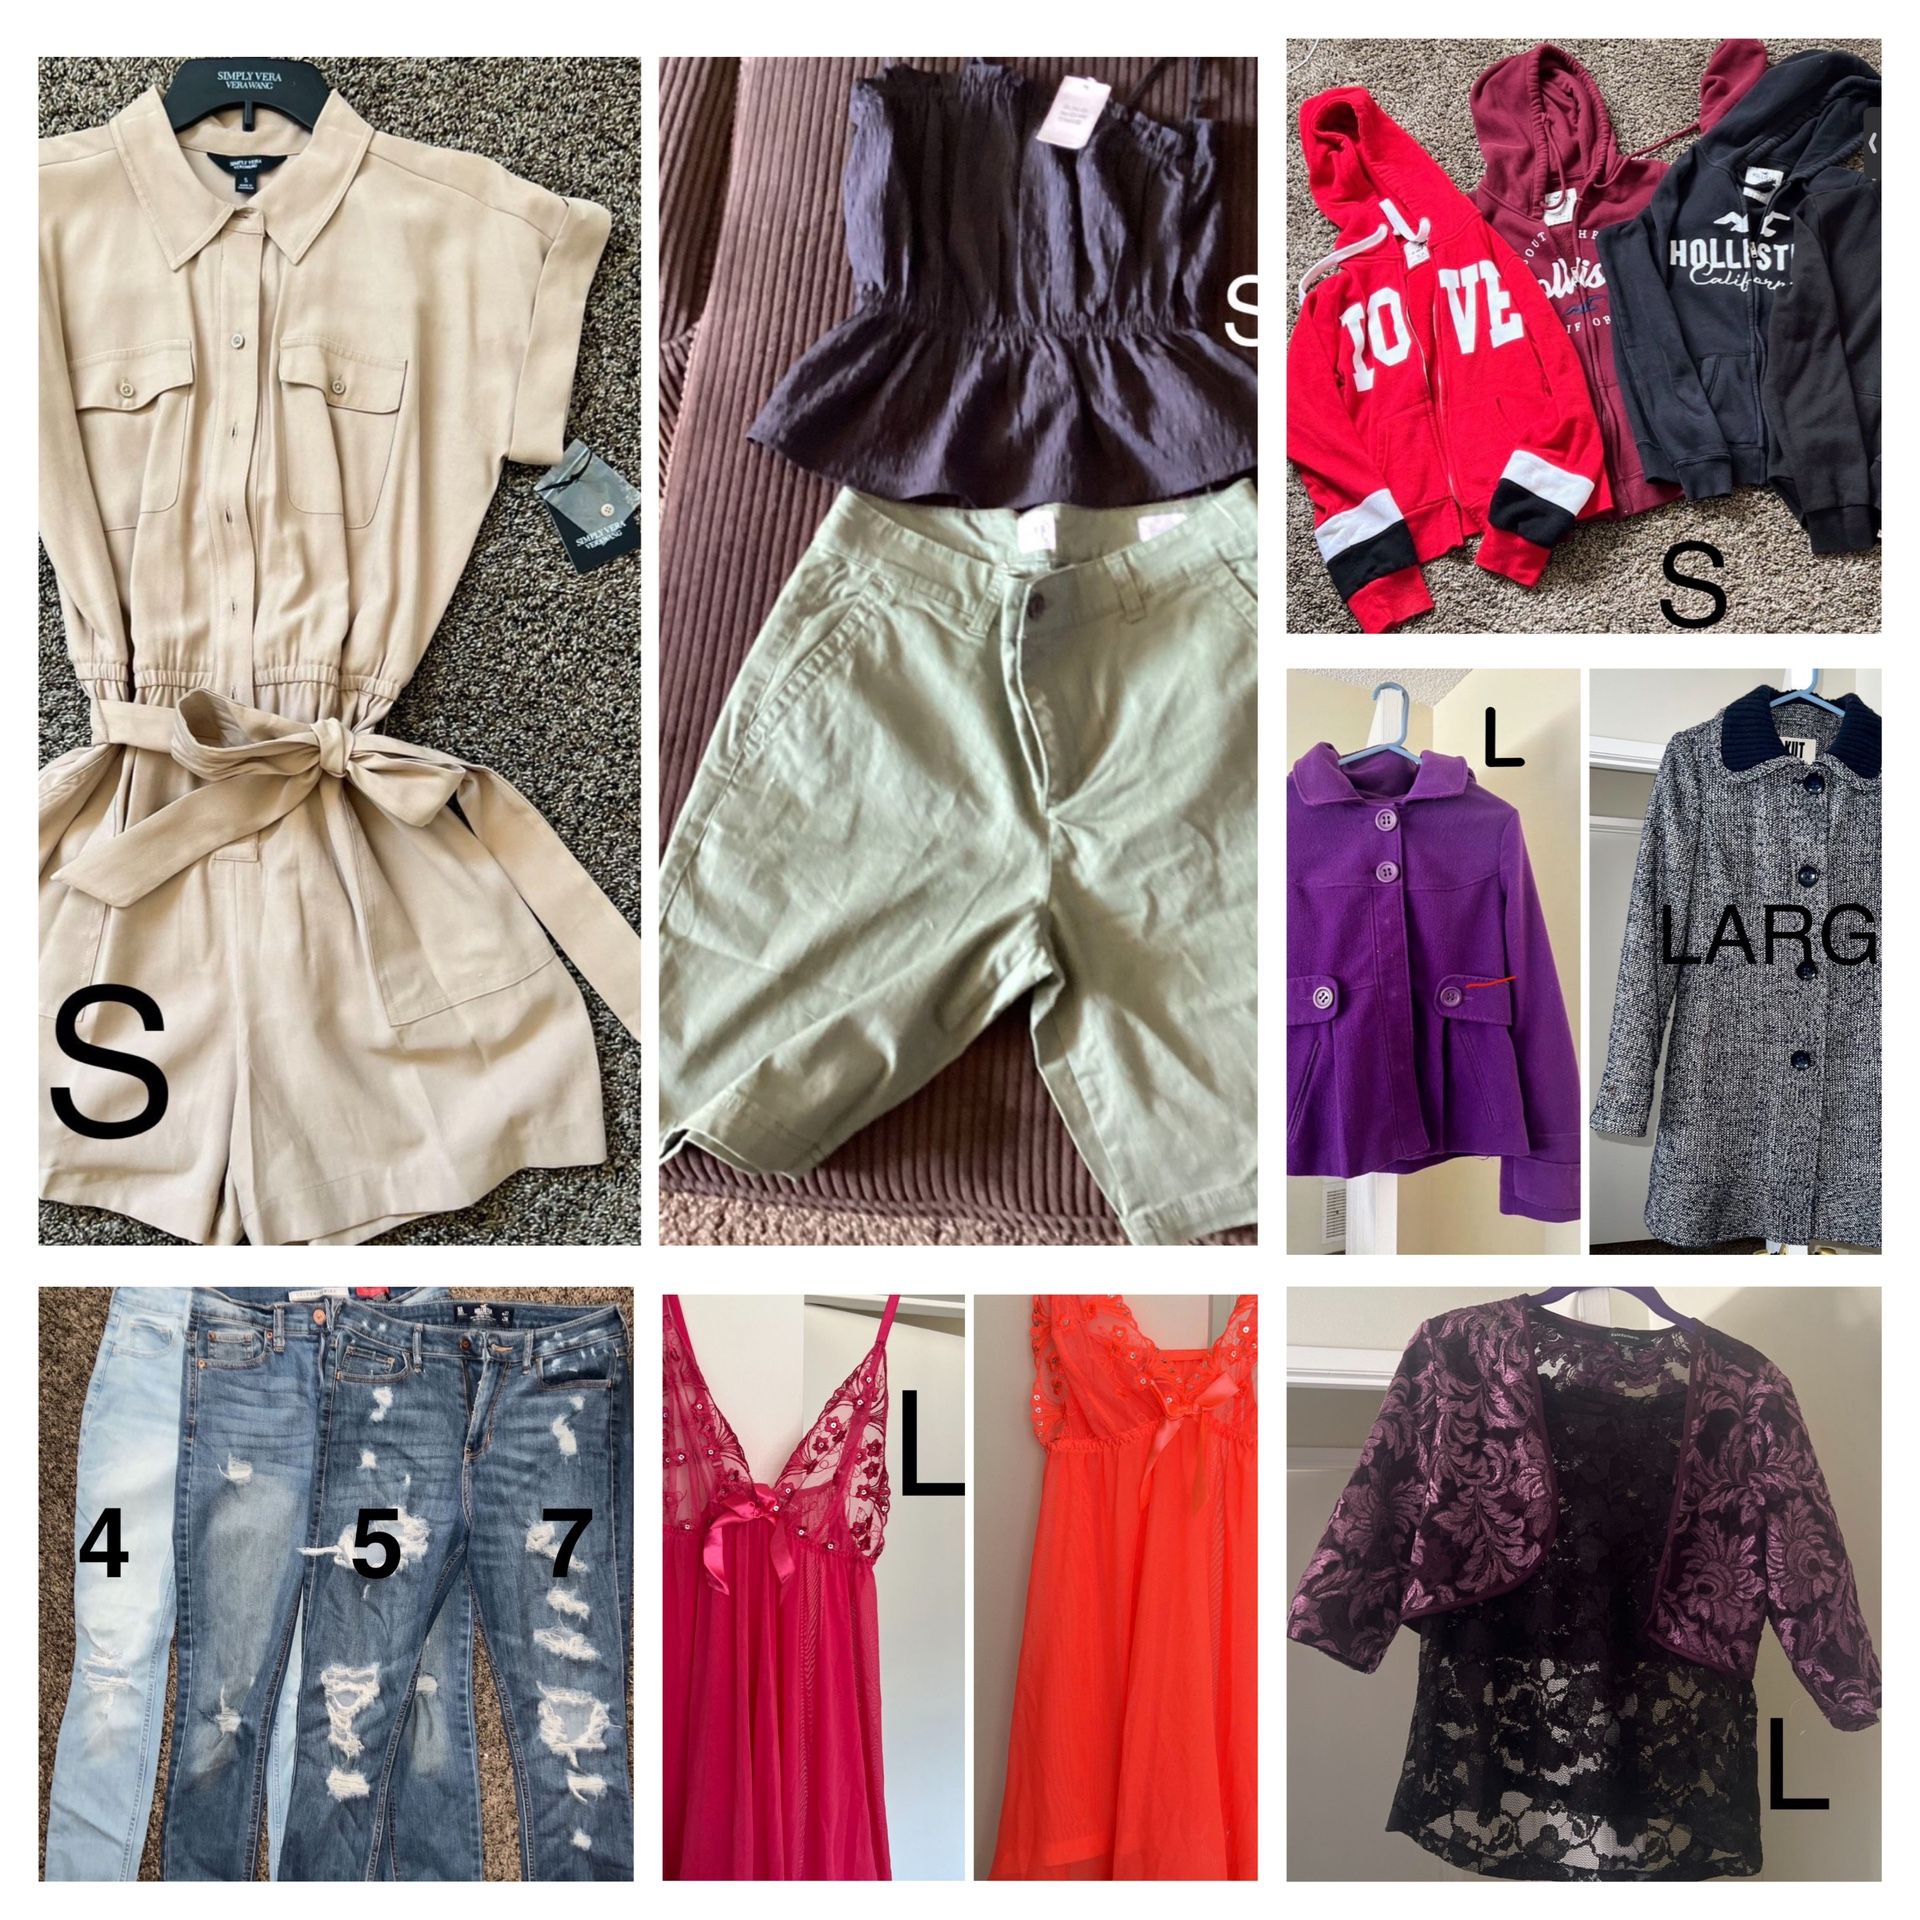 CLOTHES!! & Much More! Starting @ $4